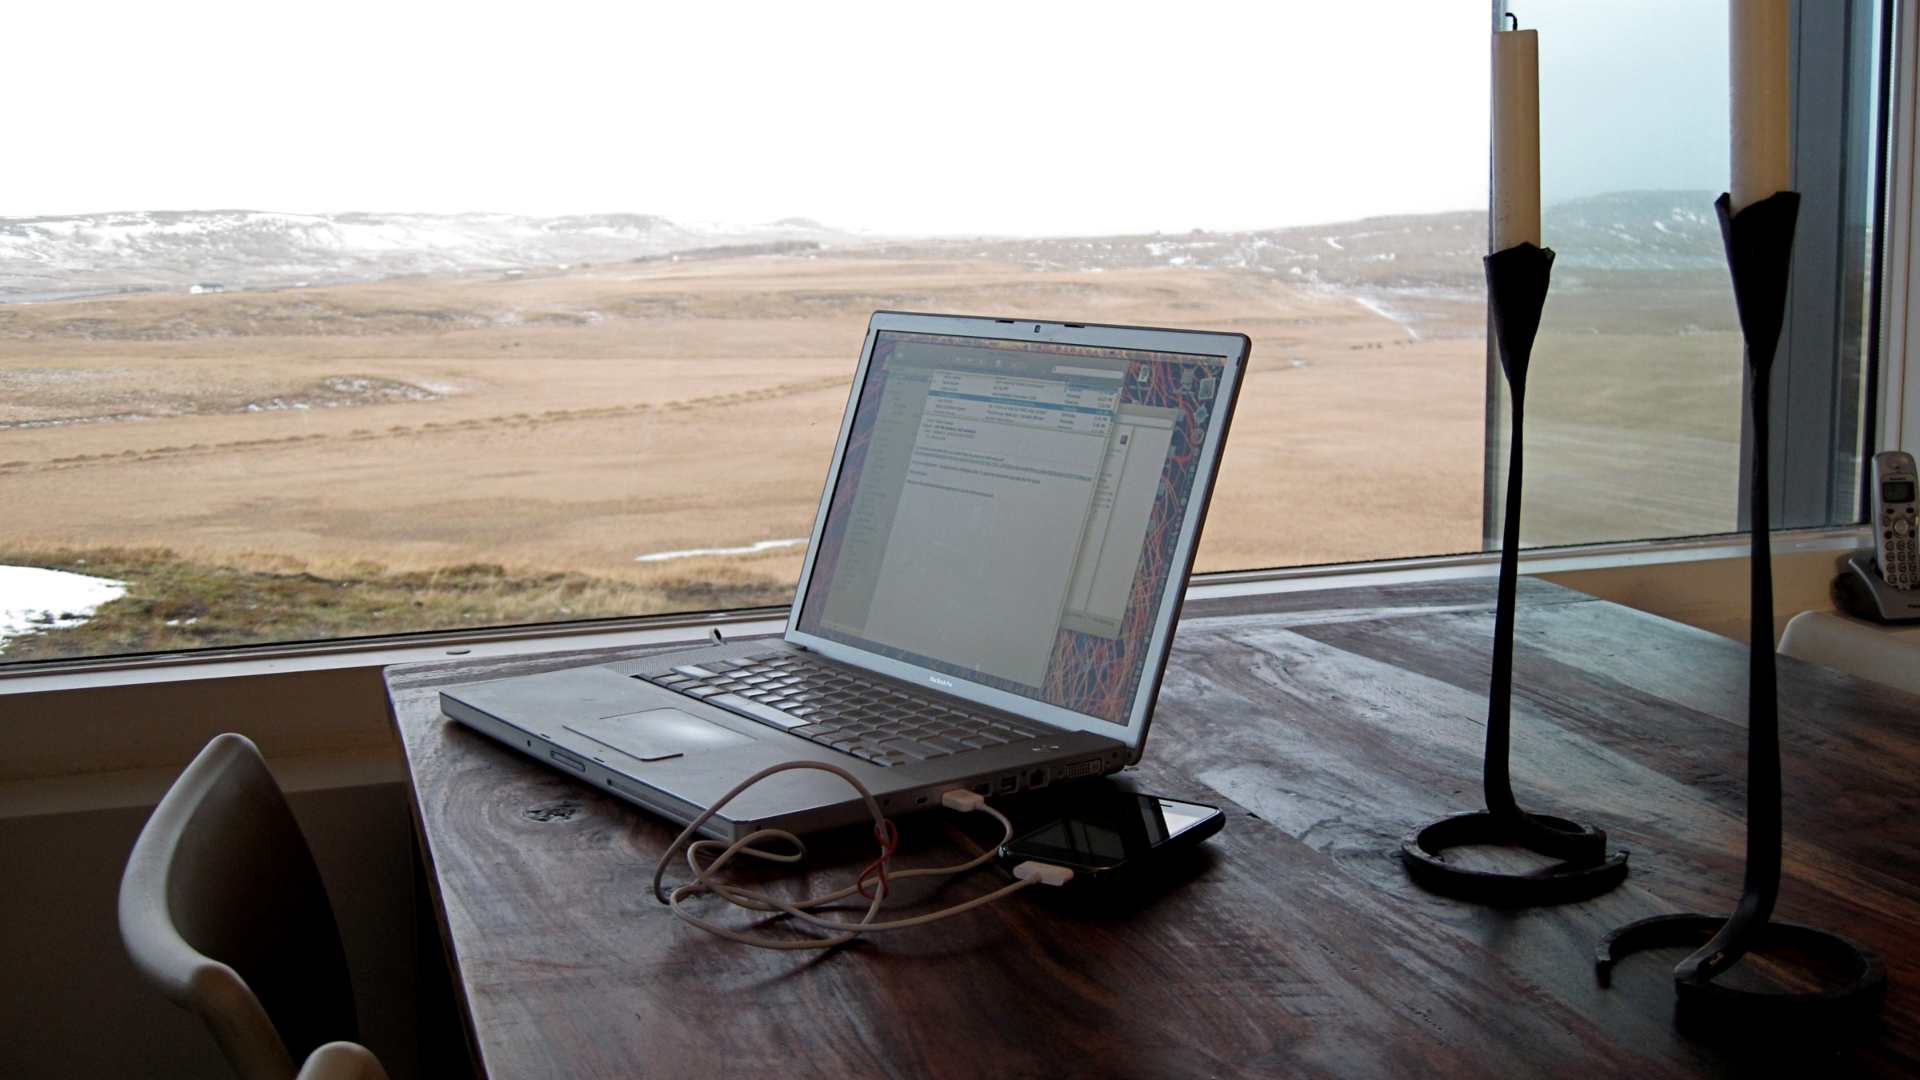 A laptop in front of a window with a beautiful view, surrounded by two unlit candles.